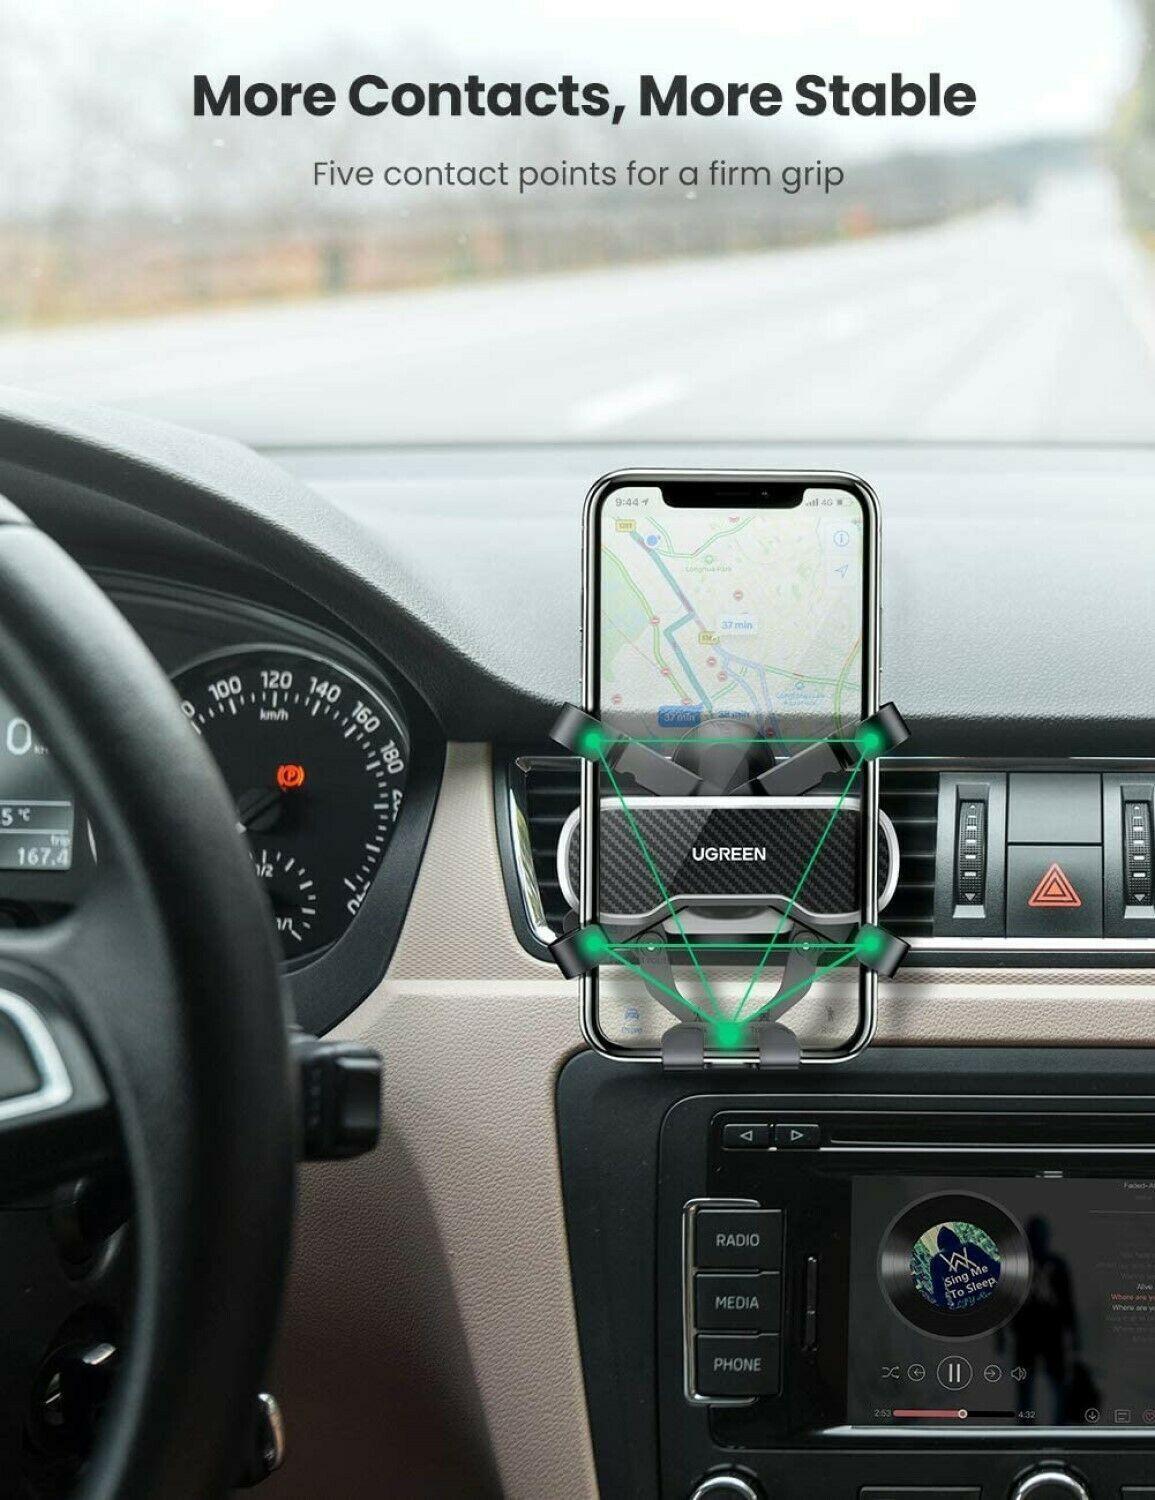 Universal Gravity Car Phone Holder with Hook 4.7" to 7" Device iPhone Samsung